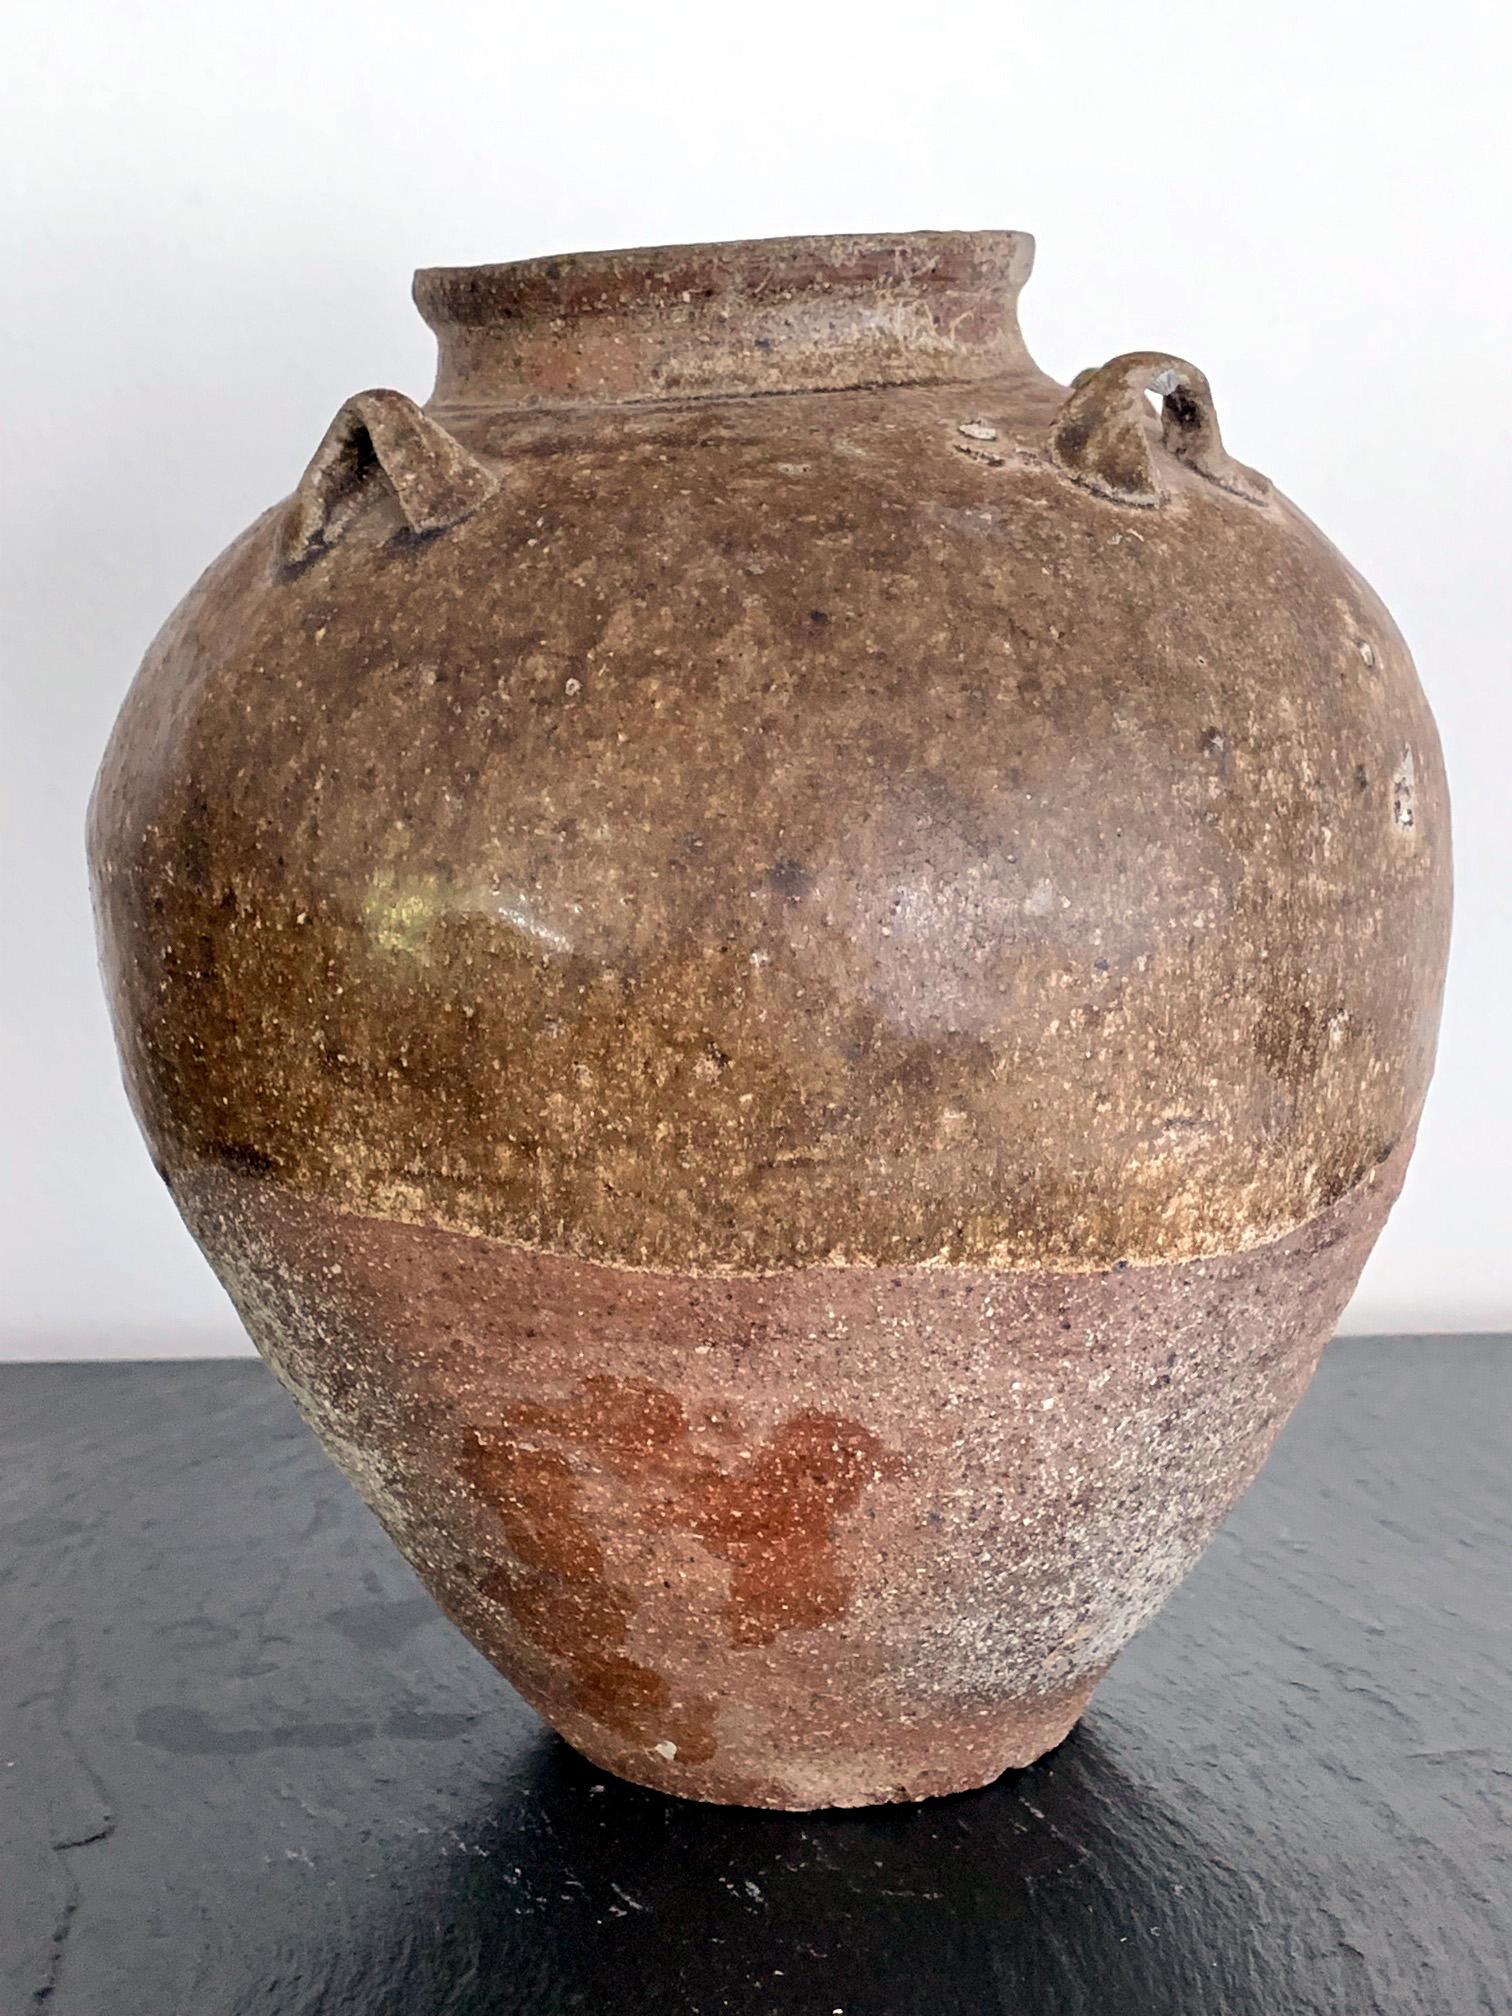 A stoneware pottery jar used for storage, made in southern China Fujian or Guangdong province since Song Dynasty for domestic use as well as export. They were widely exported to South East Asia and further afield, and sometimes known as Martaban